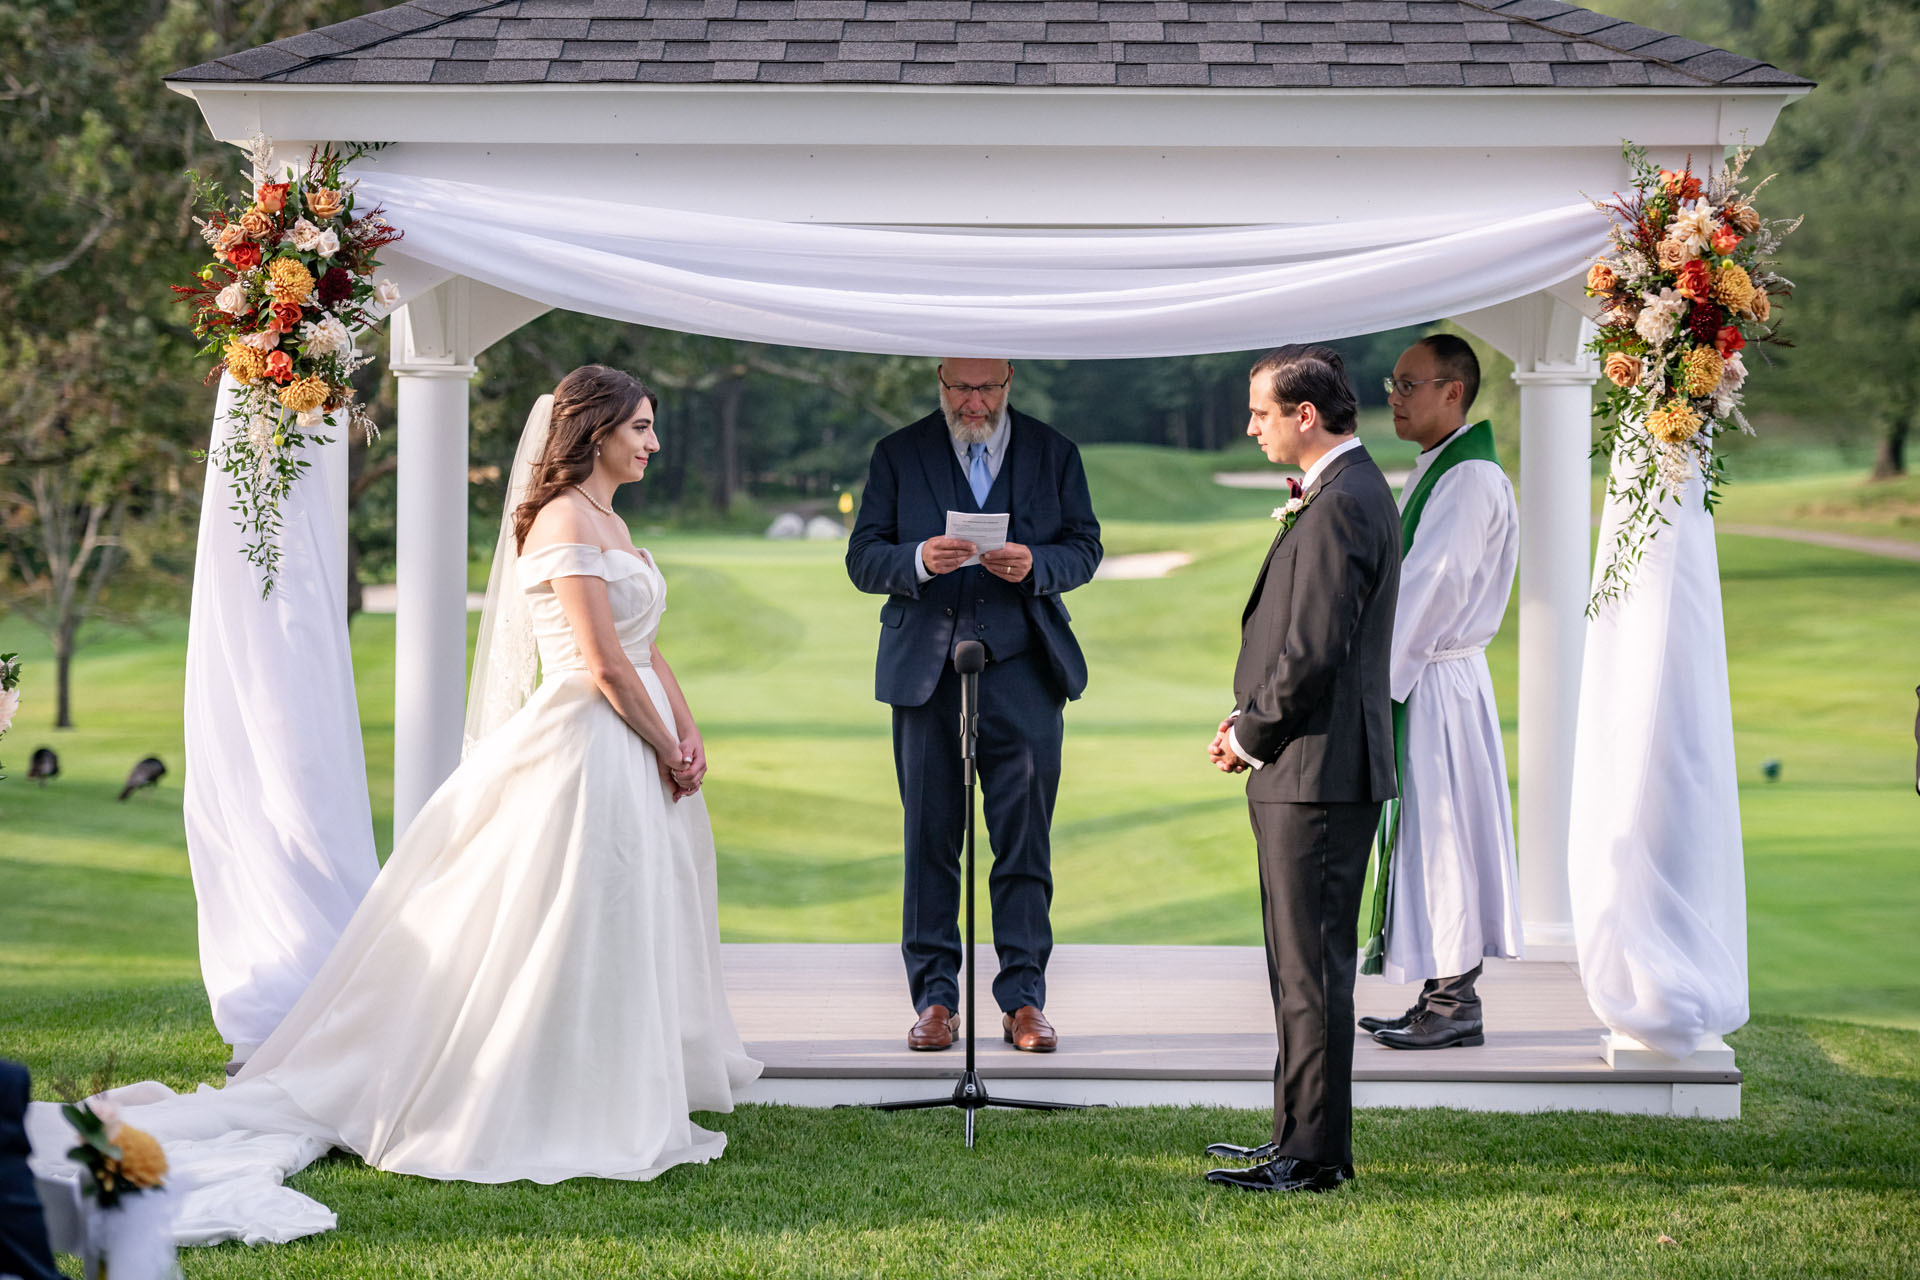 Beautiful outdoor gazebo ceremony, close up view